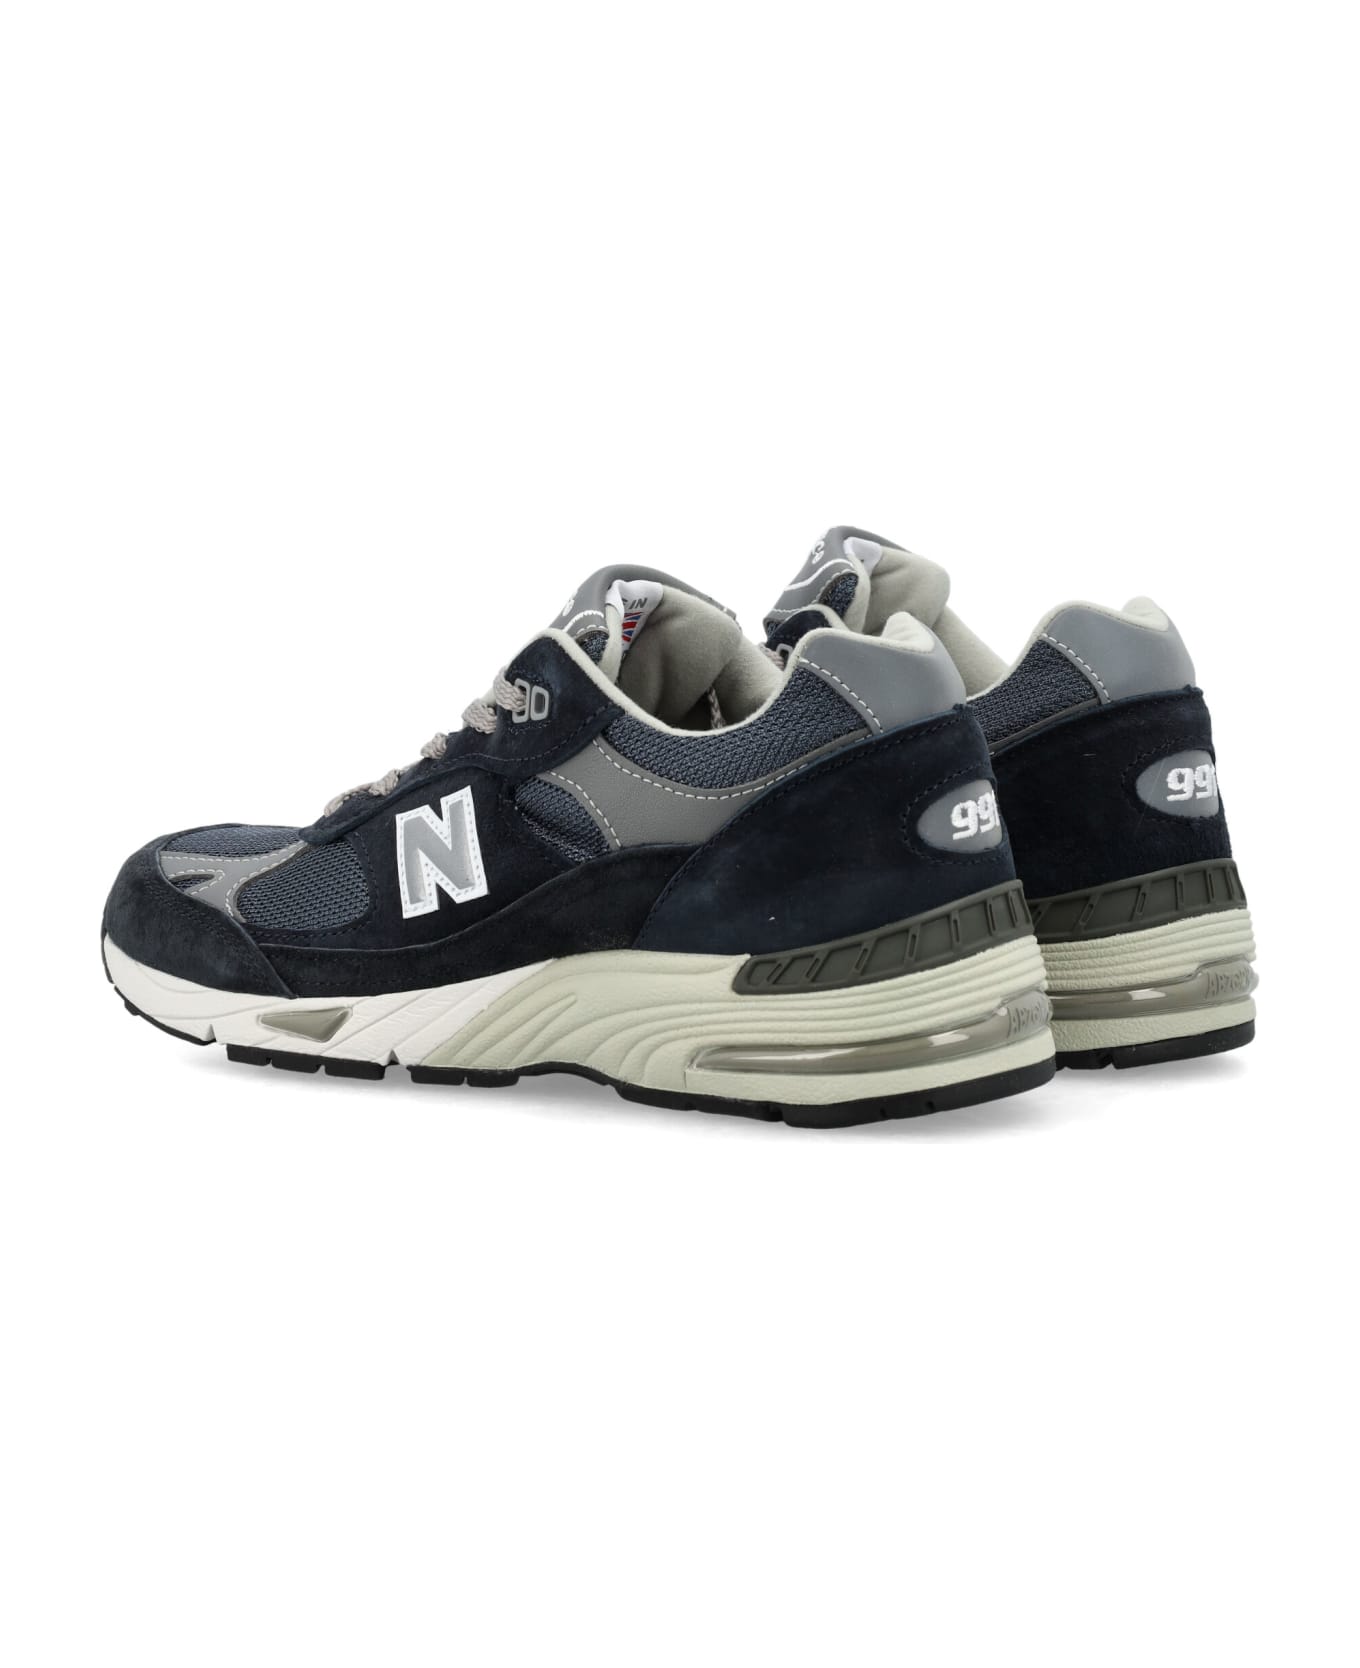 New Balance Made In Uk 991v1 Woman's Sneakers - NAVY